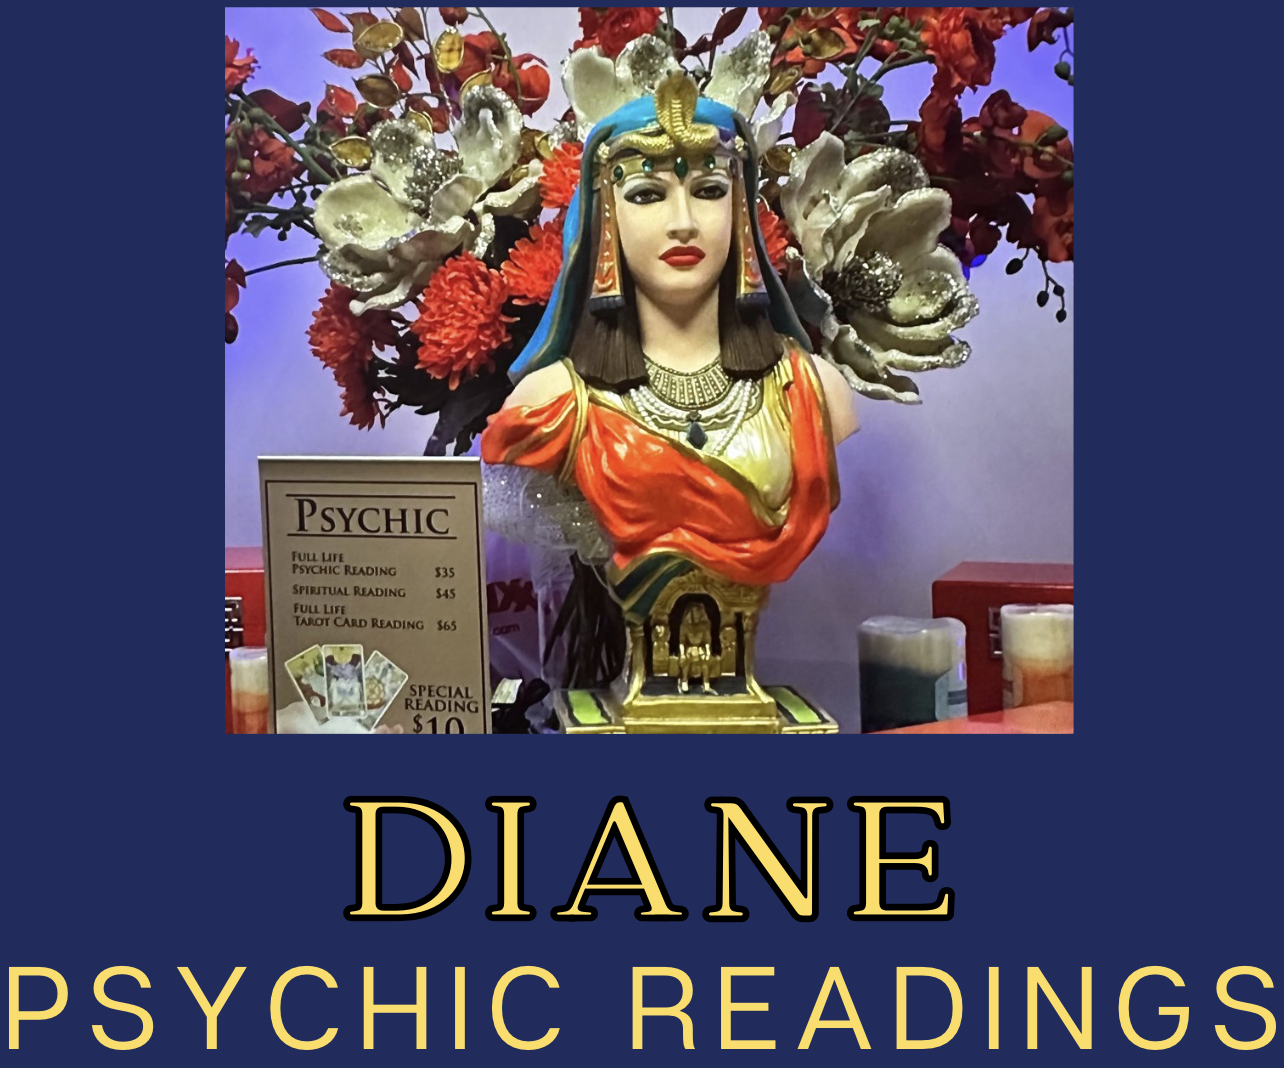 Psychic Readings by DIANE